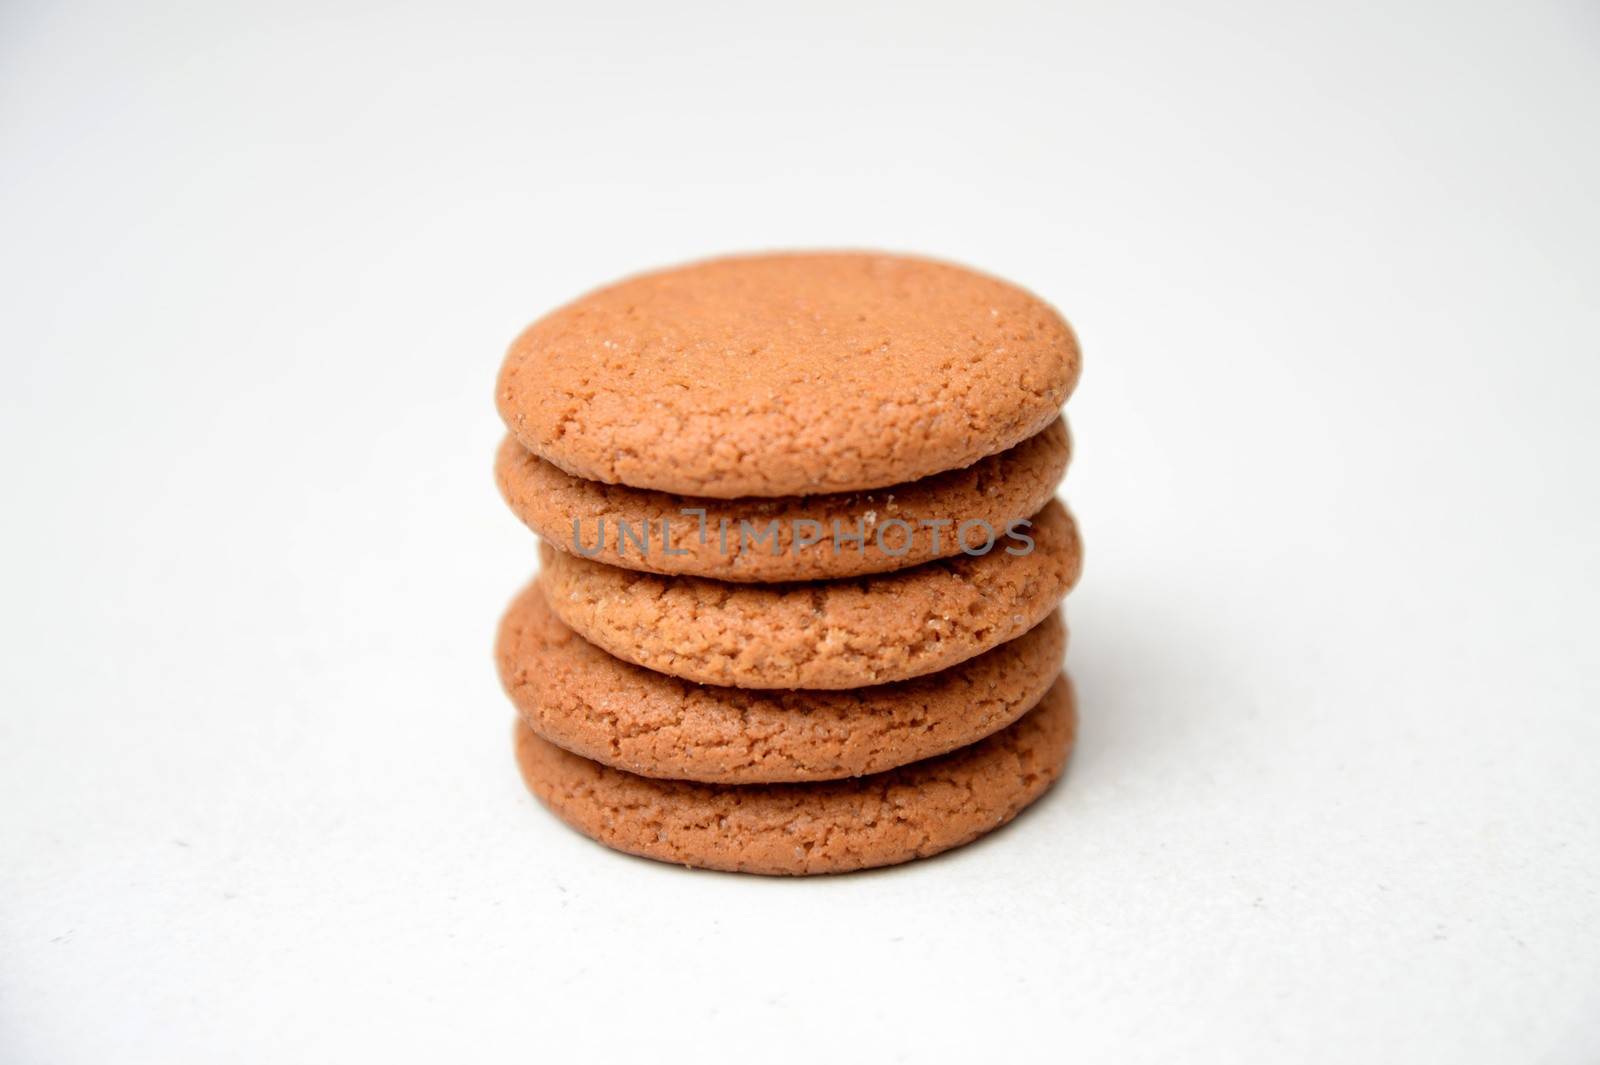 Ginger biscuits isolated against a white background